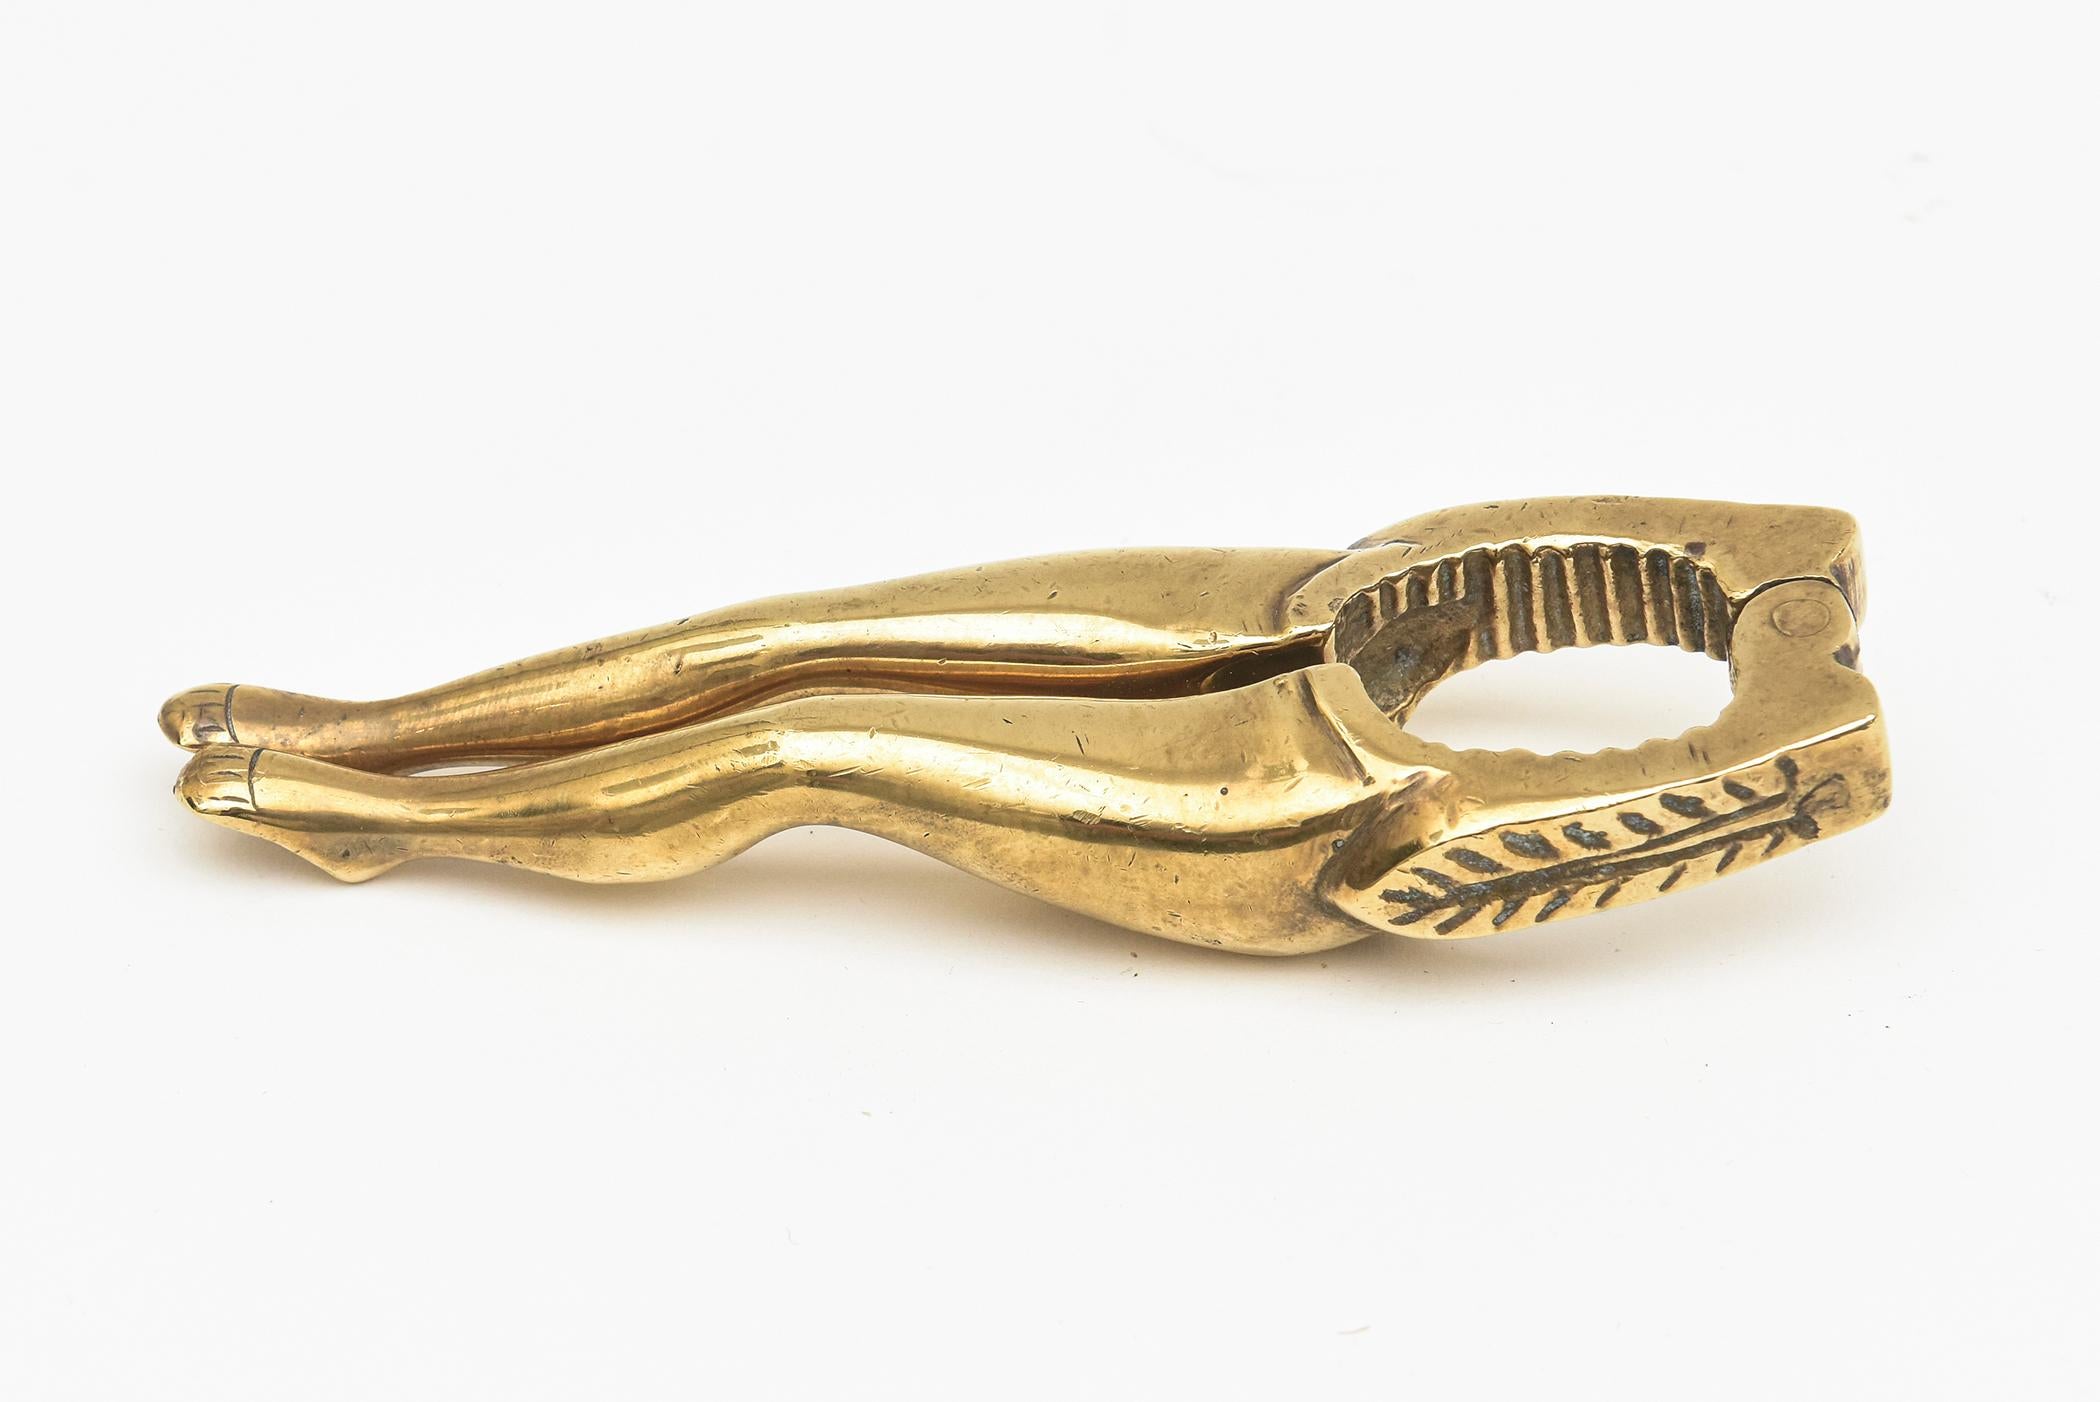 This fun conversational brass nut cracker with legs is mid century modern. It has been lightly polished and has a leaf pattern design on the sides. From the 50's. Great barware or host gift idea.